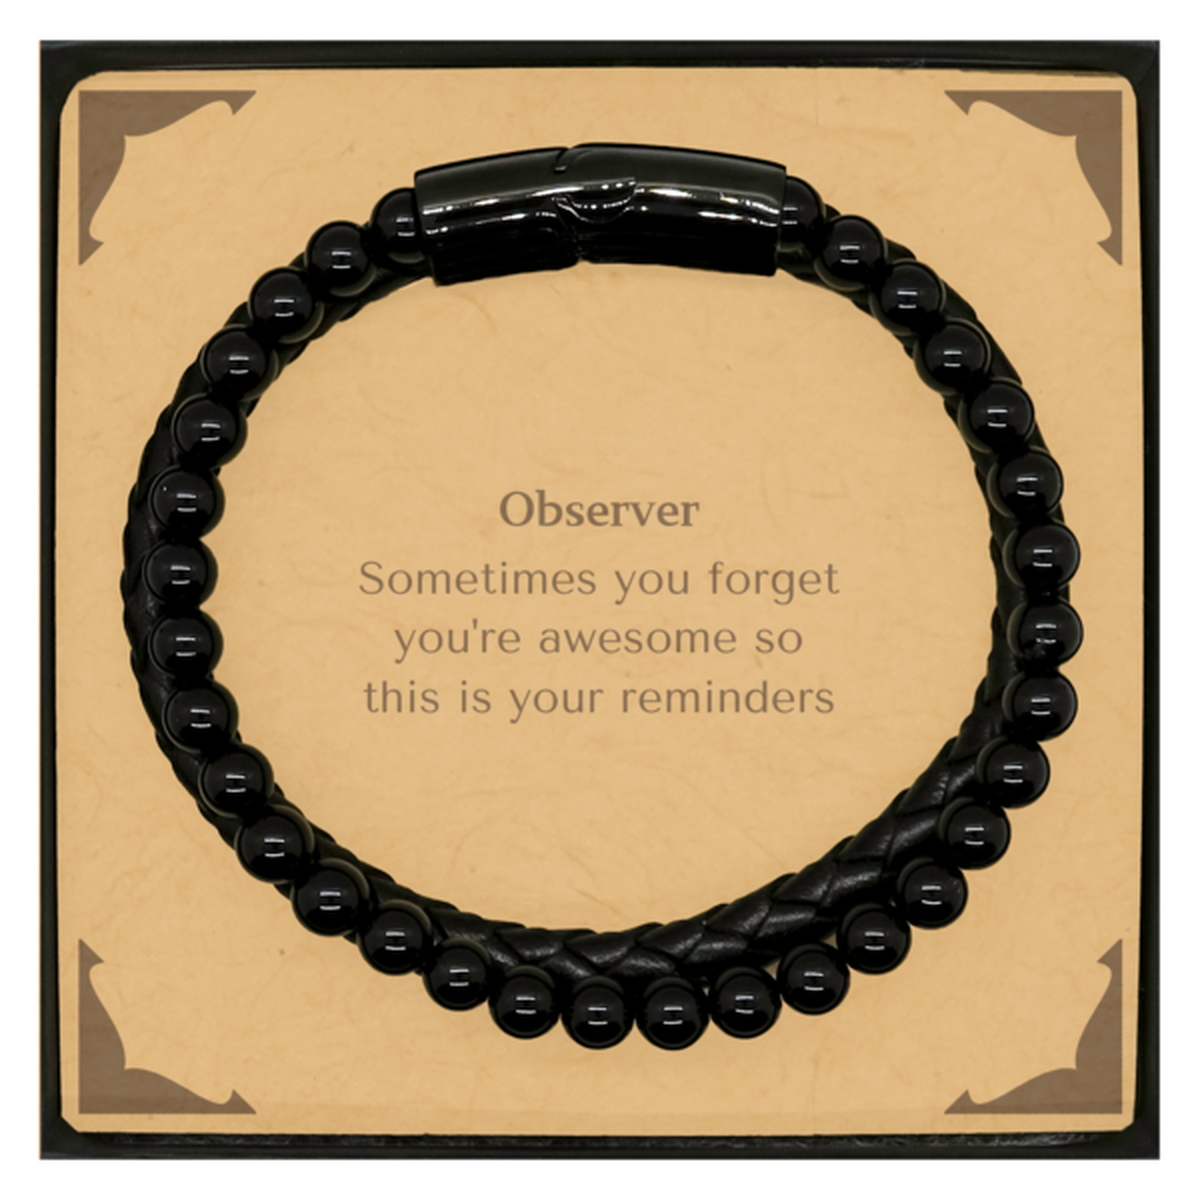 Sentimental Observer Stone Leather Bracelets, Observer Sometimes you forget you're awesome so this is your reminders, Graduation Christmas Birthday Gifts for Observer, Men, Women, Coworkers